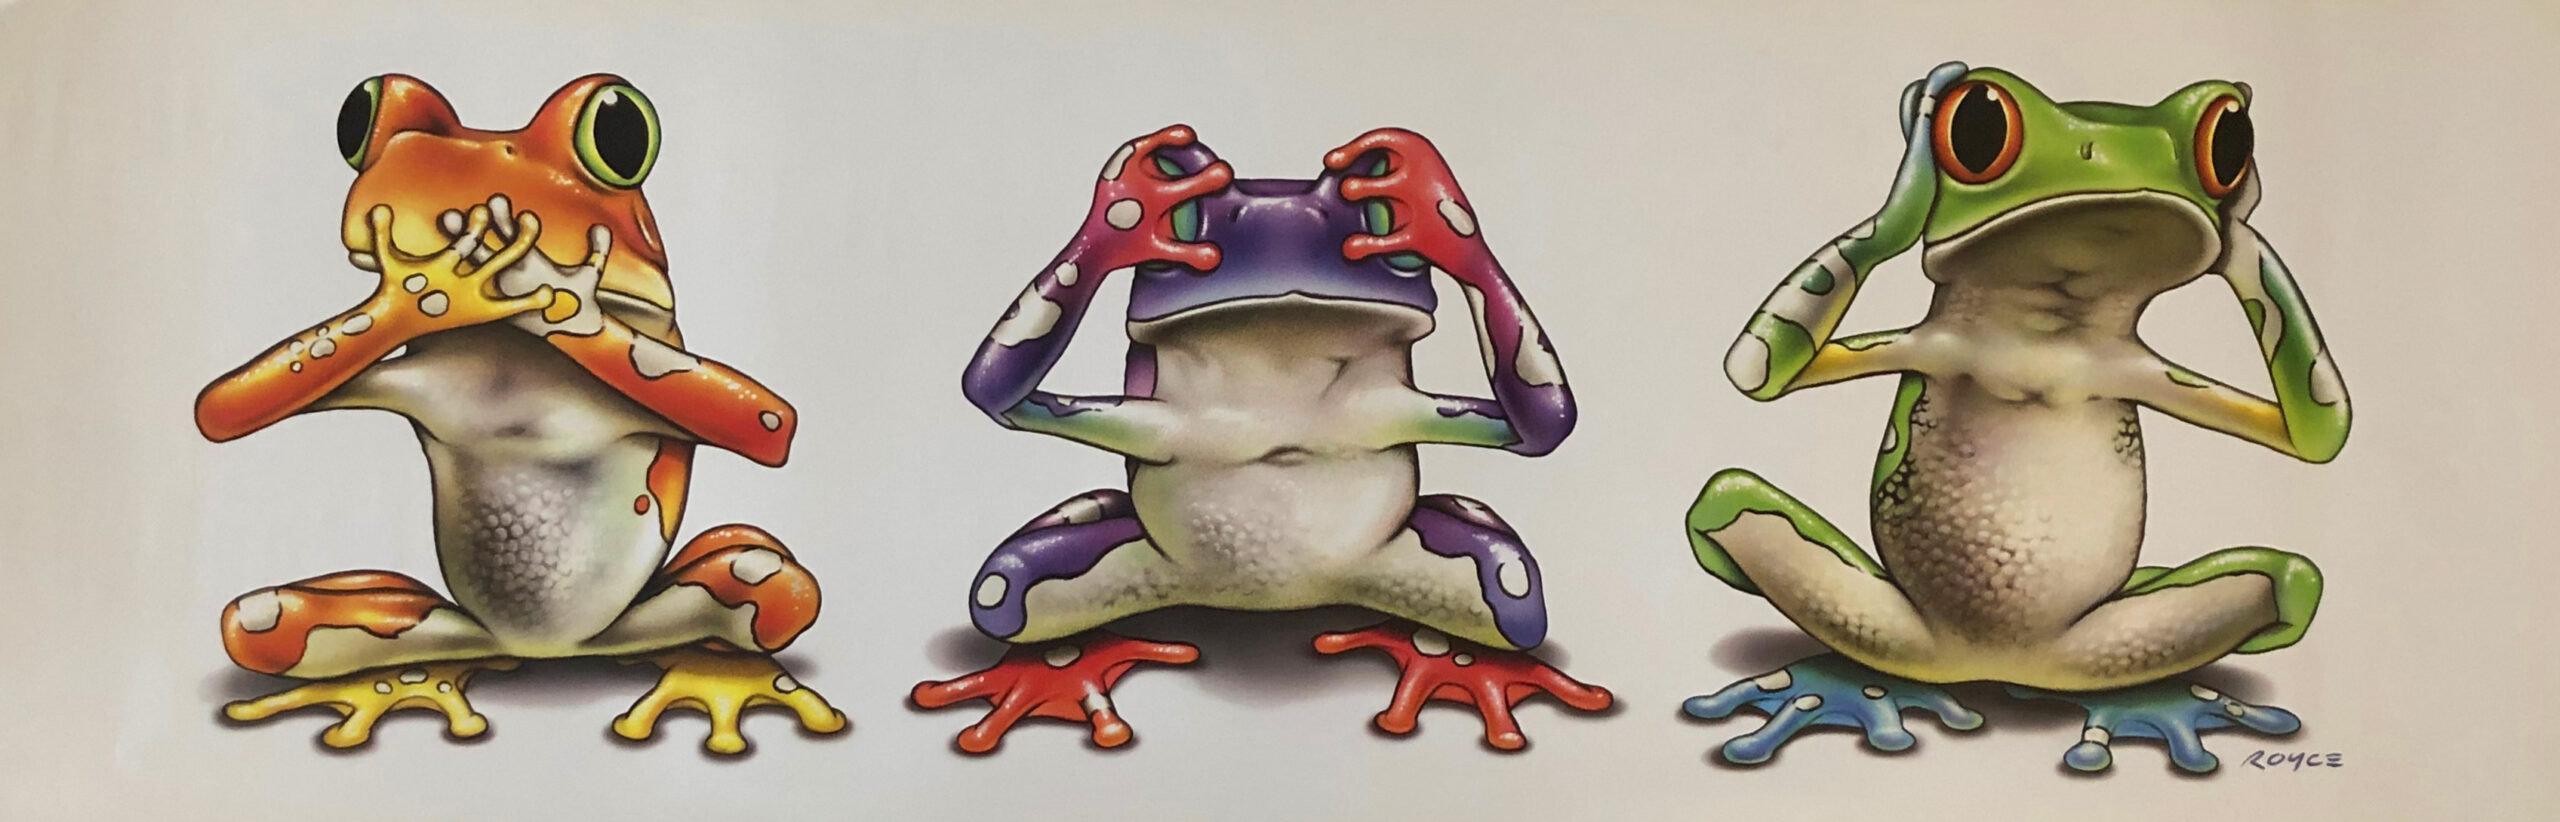 No Evil Frogs